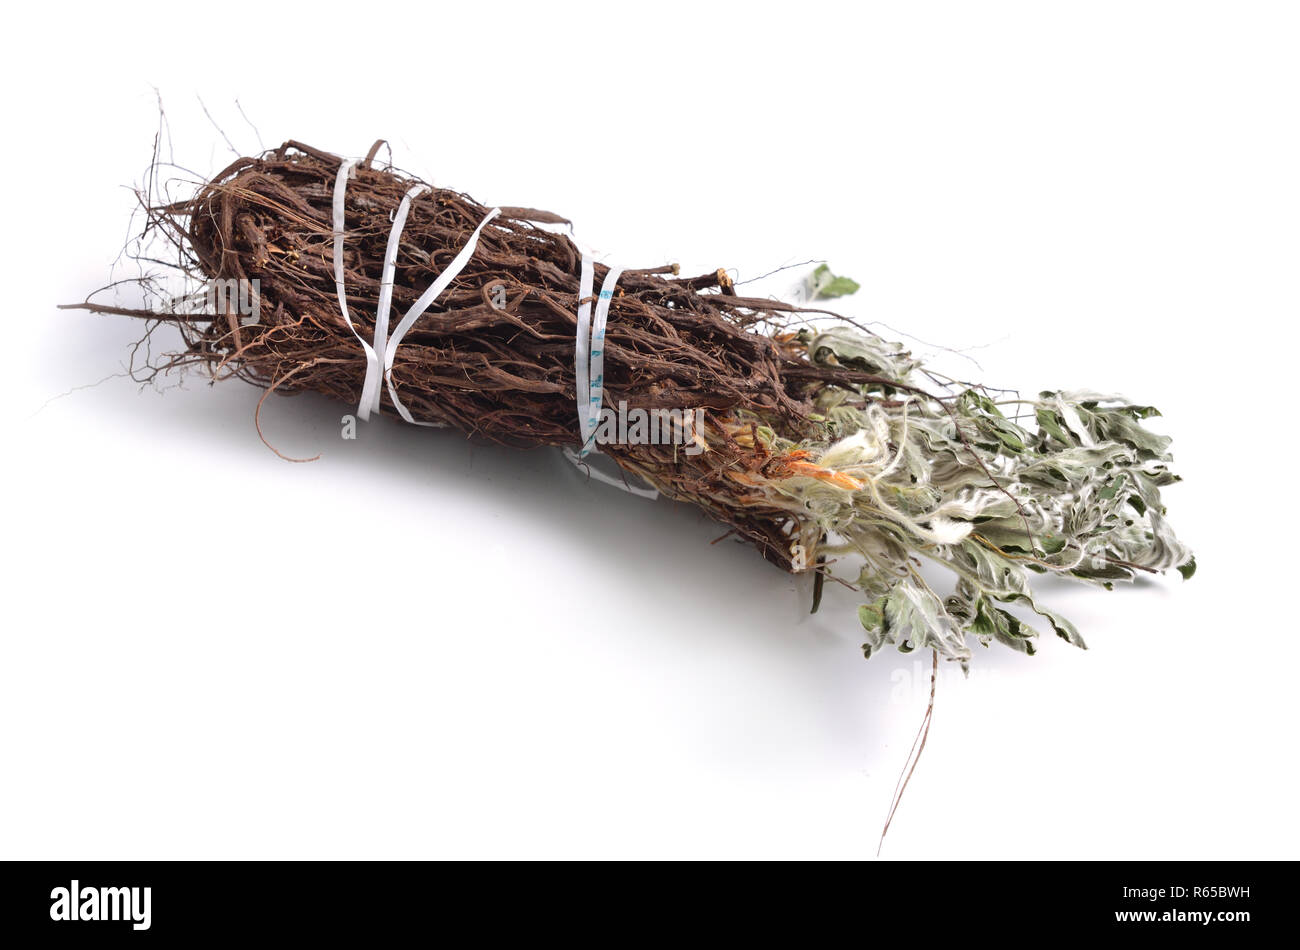 Dried medicinal herbs raw materials isolated on white. Potentilla alba. Stock Photo